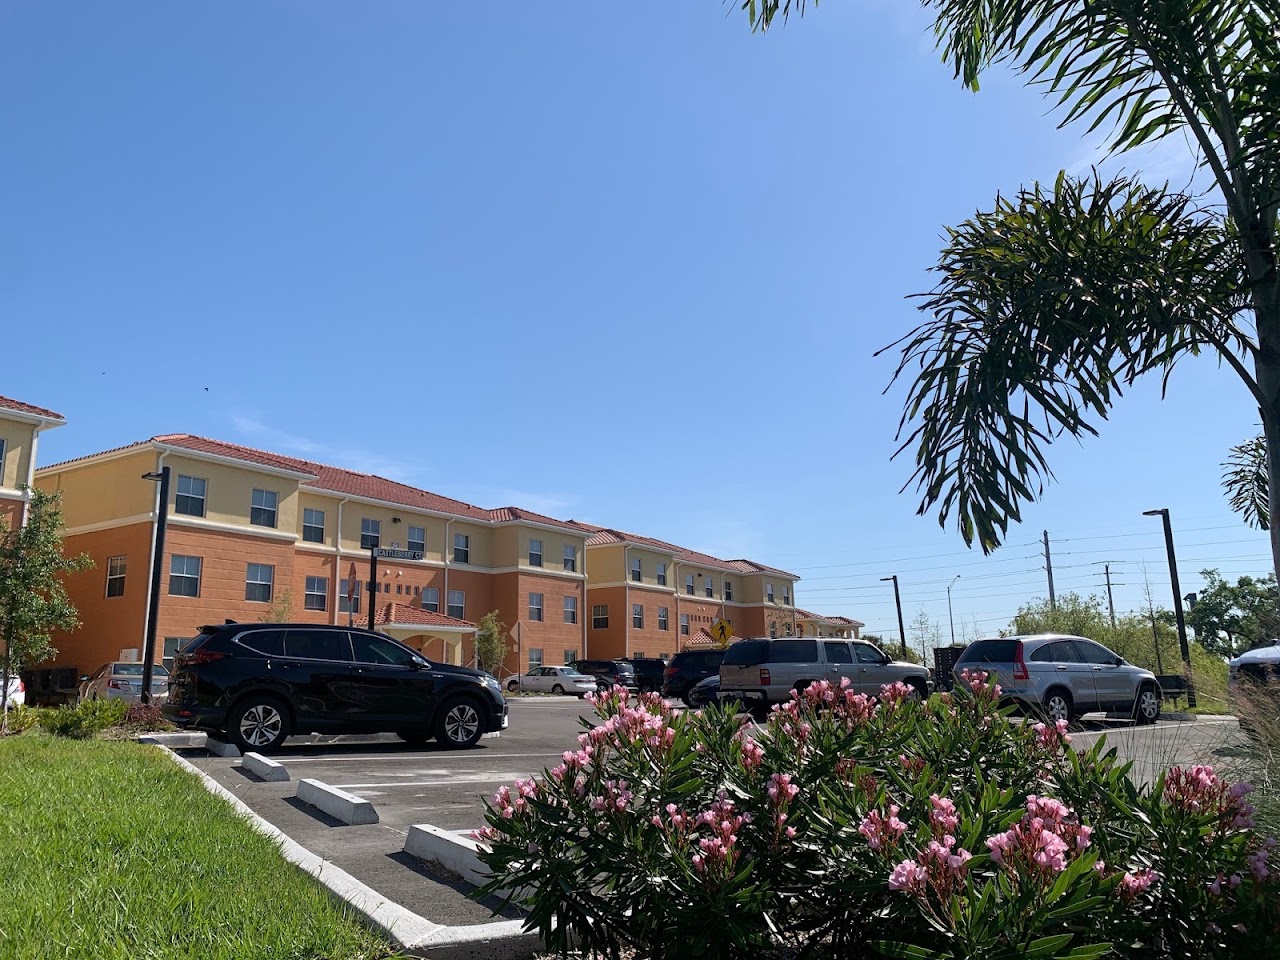 Photo of VENETIAN WALK. Affordable housing located at 201 GROVE ST N VENICE, FL 34285